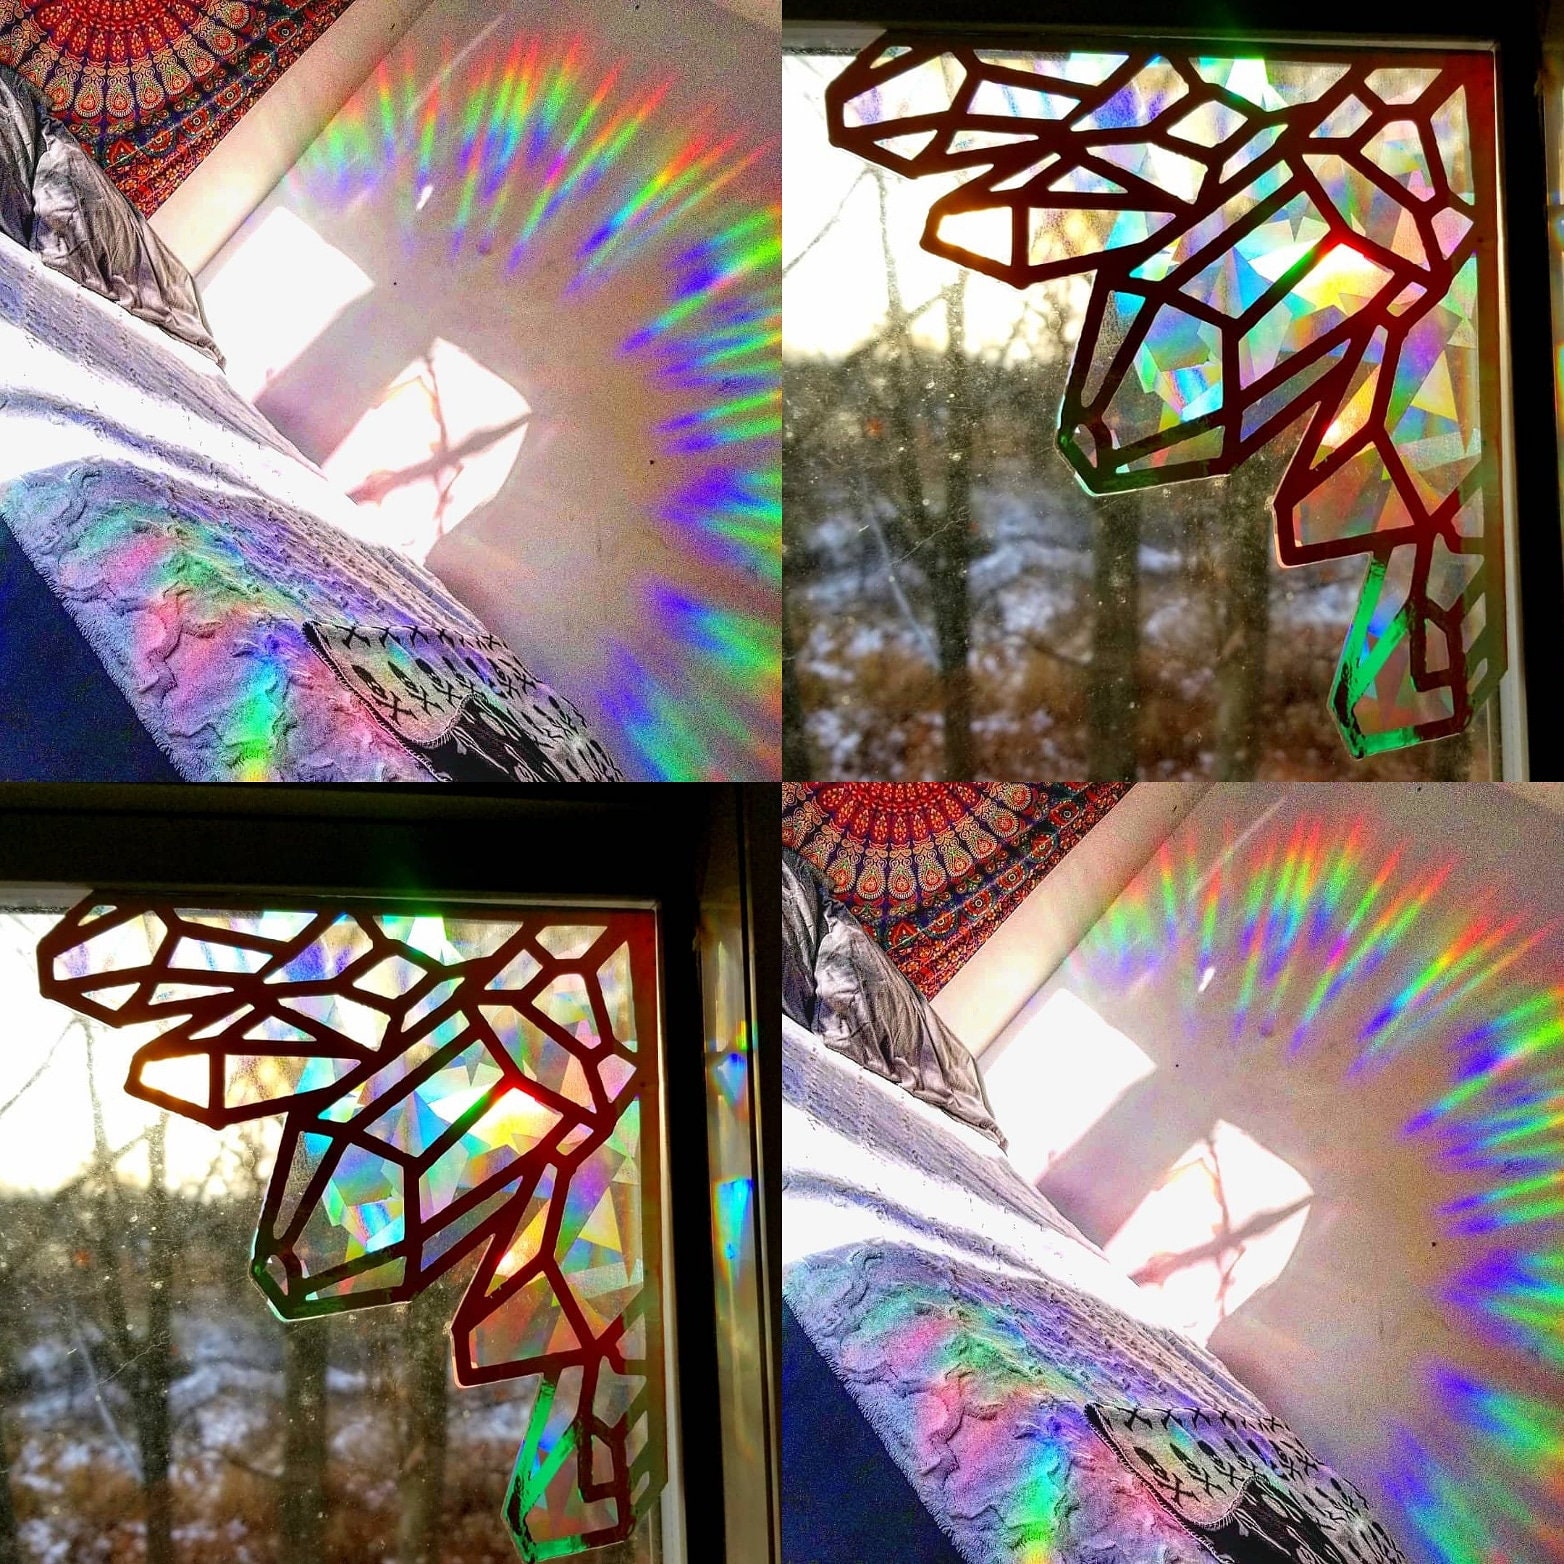 Rainbow Symphony Decorative Rainbow Window Film Holographic Prismatic Etched Glass Effect - Fill Your House with Rainbow Light 24 x 36 Panel –